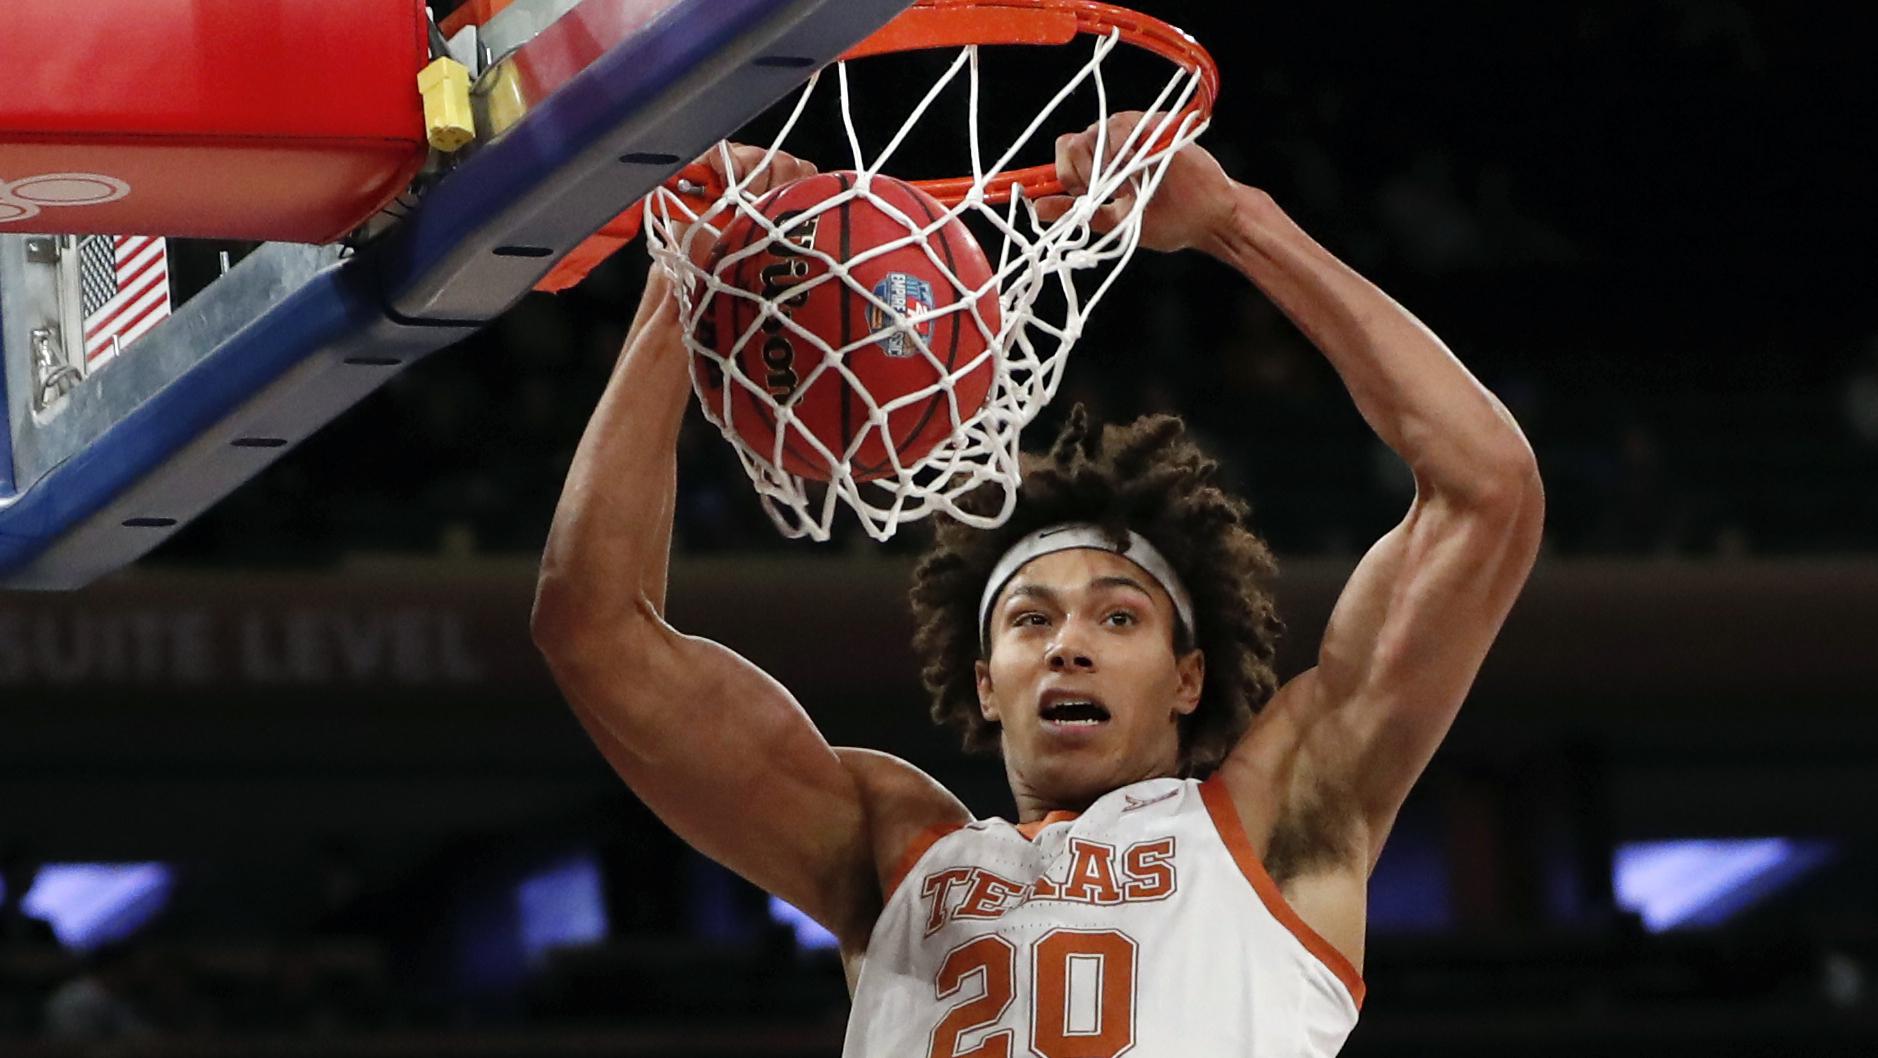 Confident Jericho Sims has been key during Texas' strong start